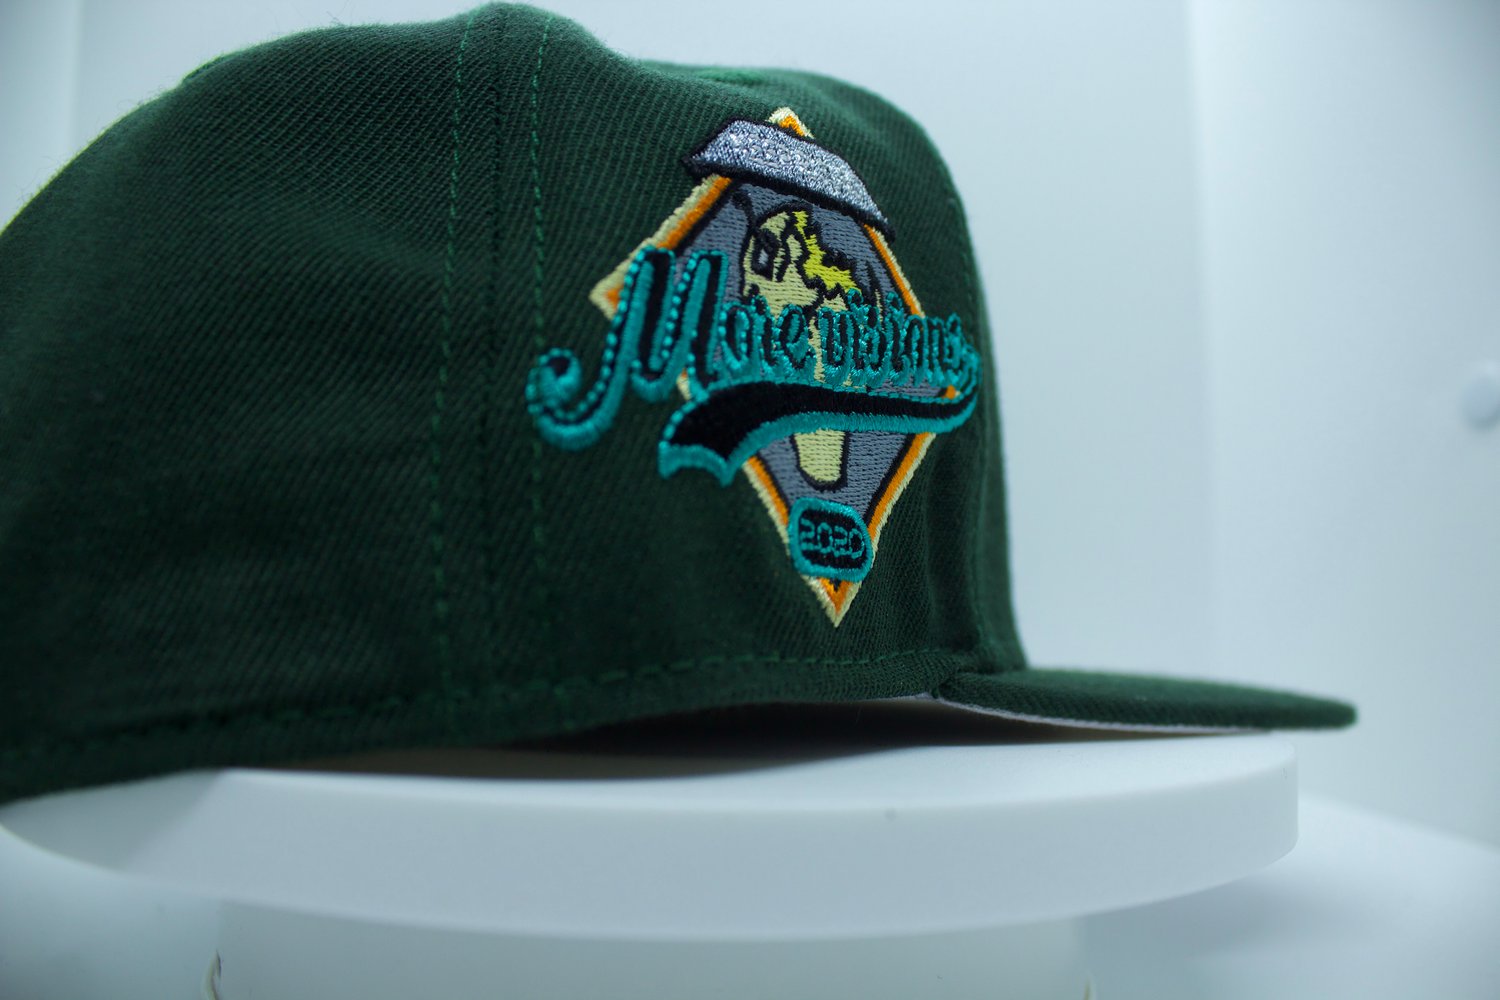 Image of GREY BRIM AW20 SERIES  (FOREST GREEN)